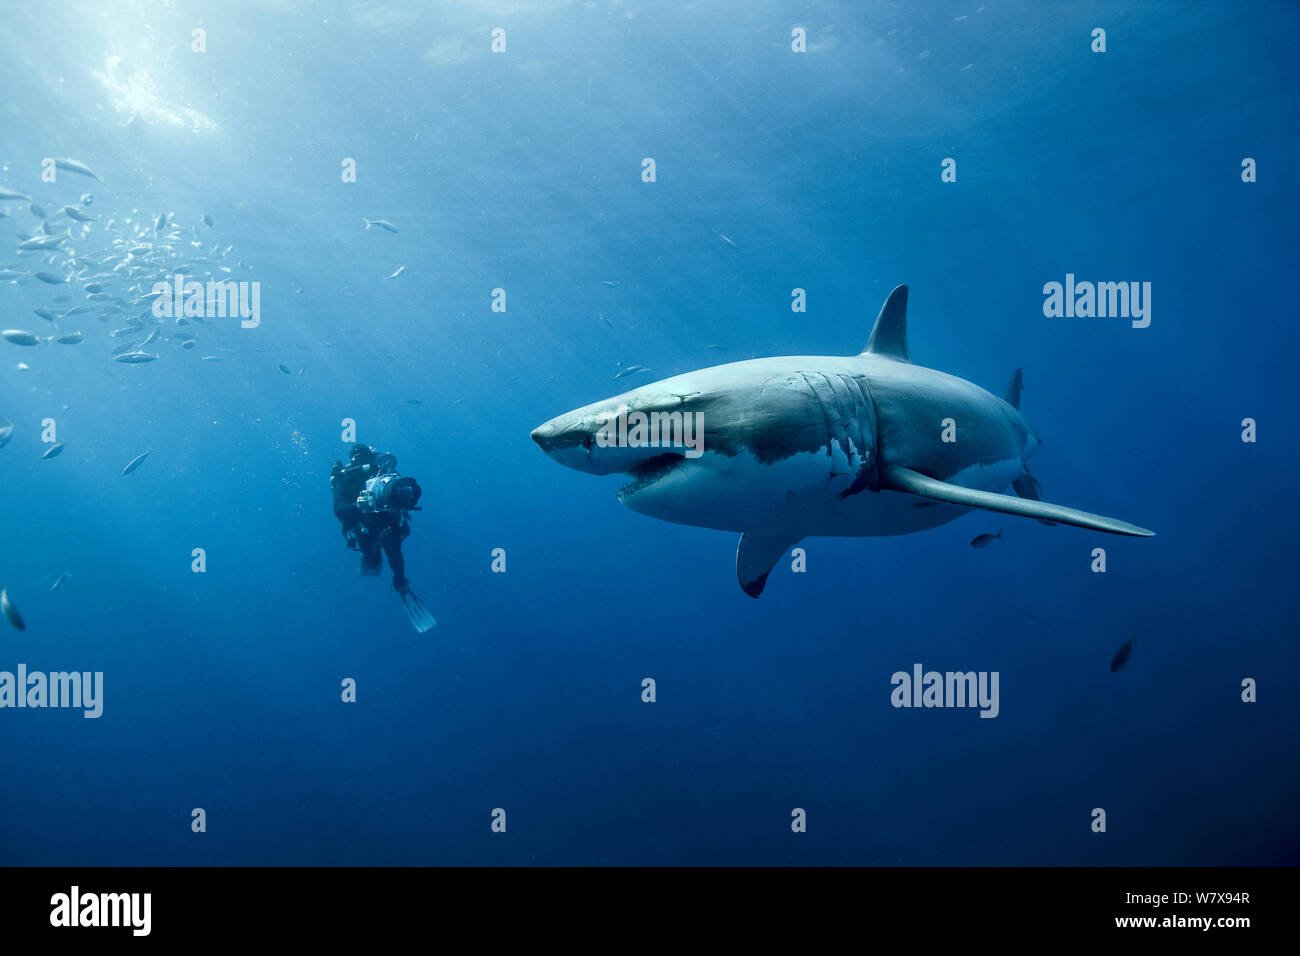 Cameraman filming a Great white shark (Carcharodon carcharias) in open water, Guadalupe island, Mexico. Pacific Ocean. November 2006. Stock Photo